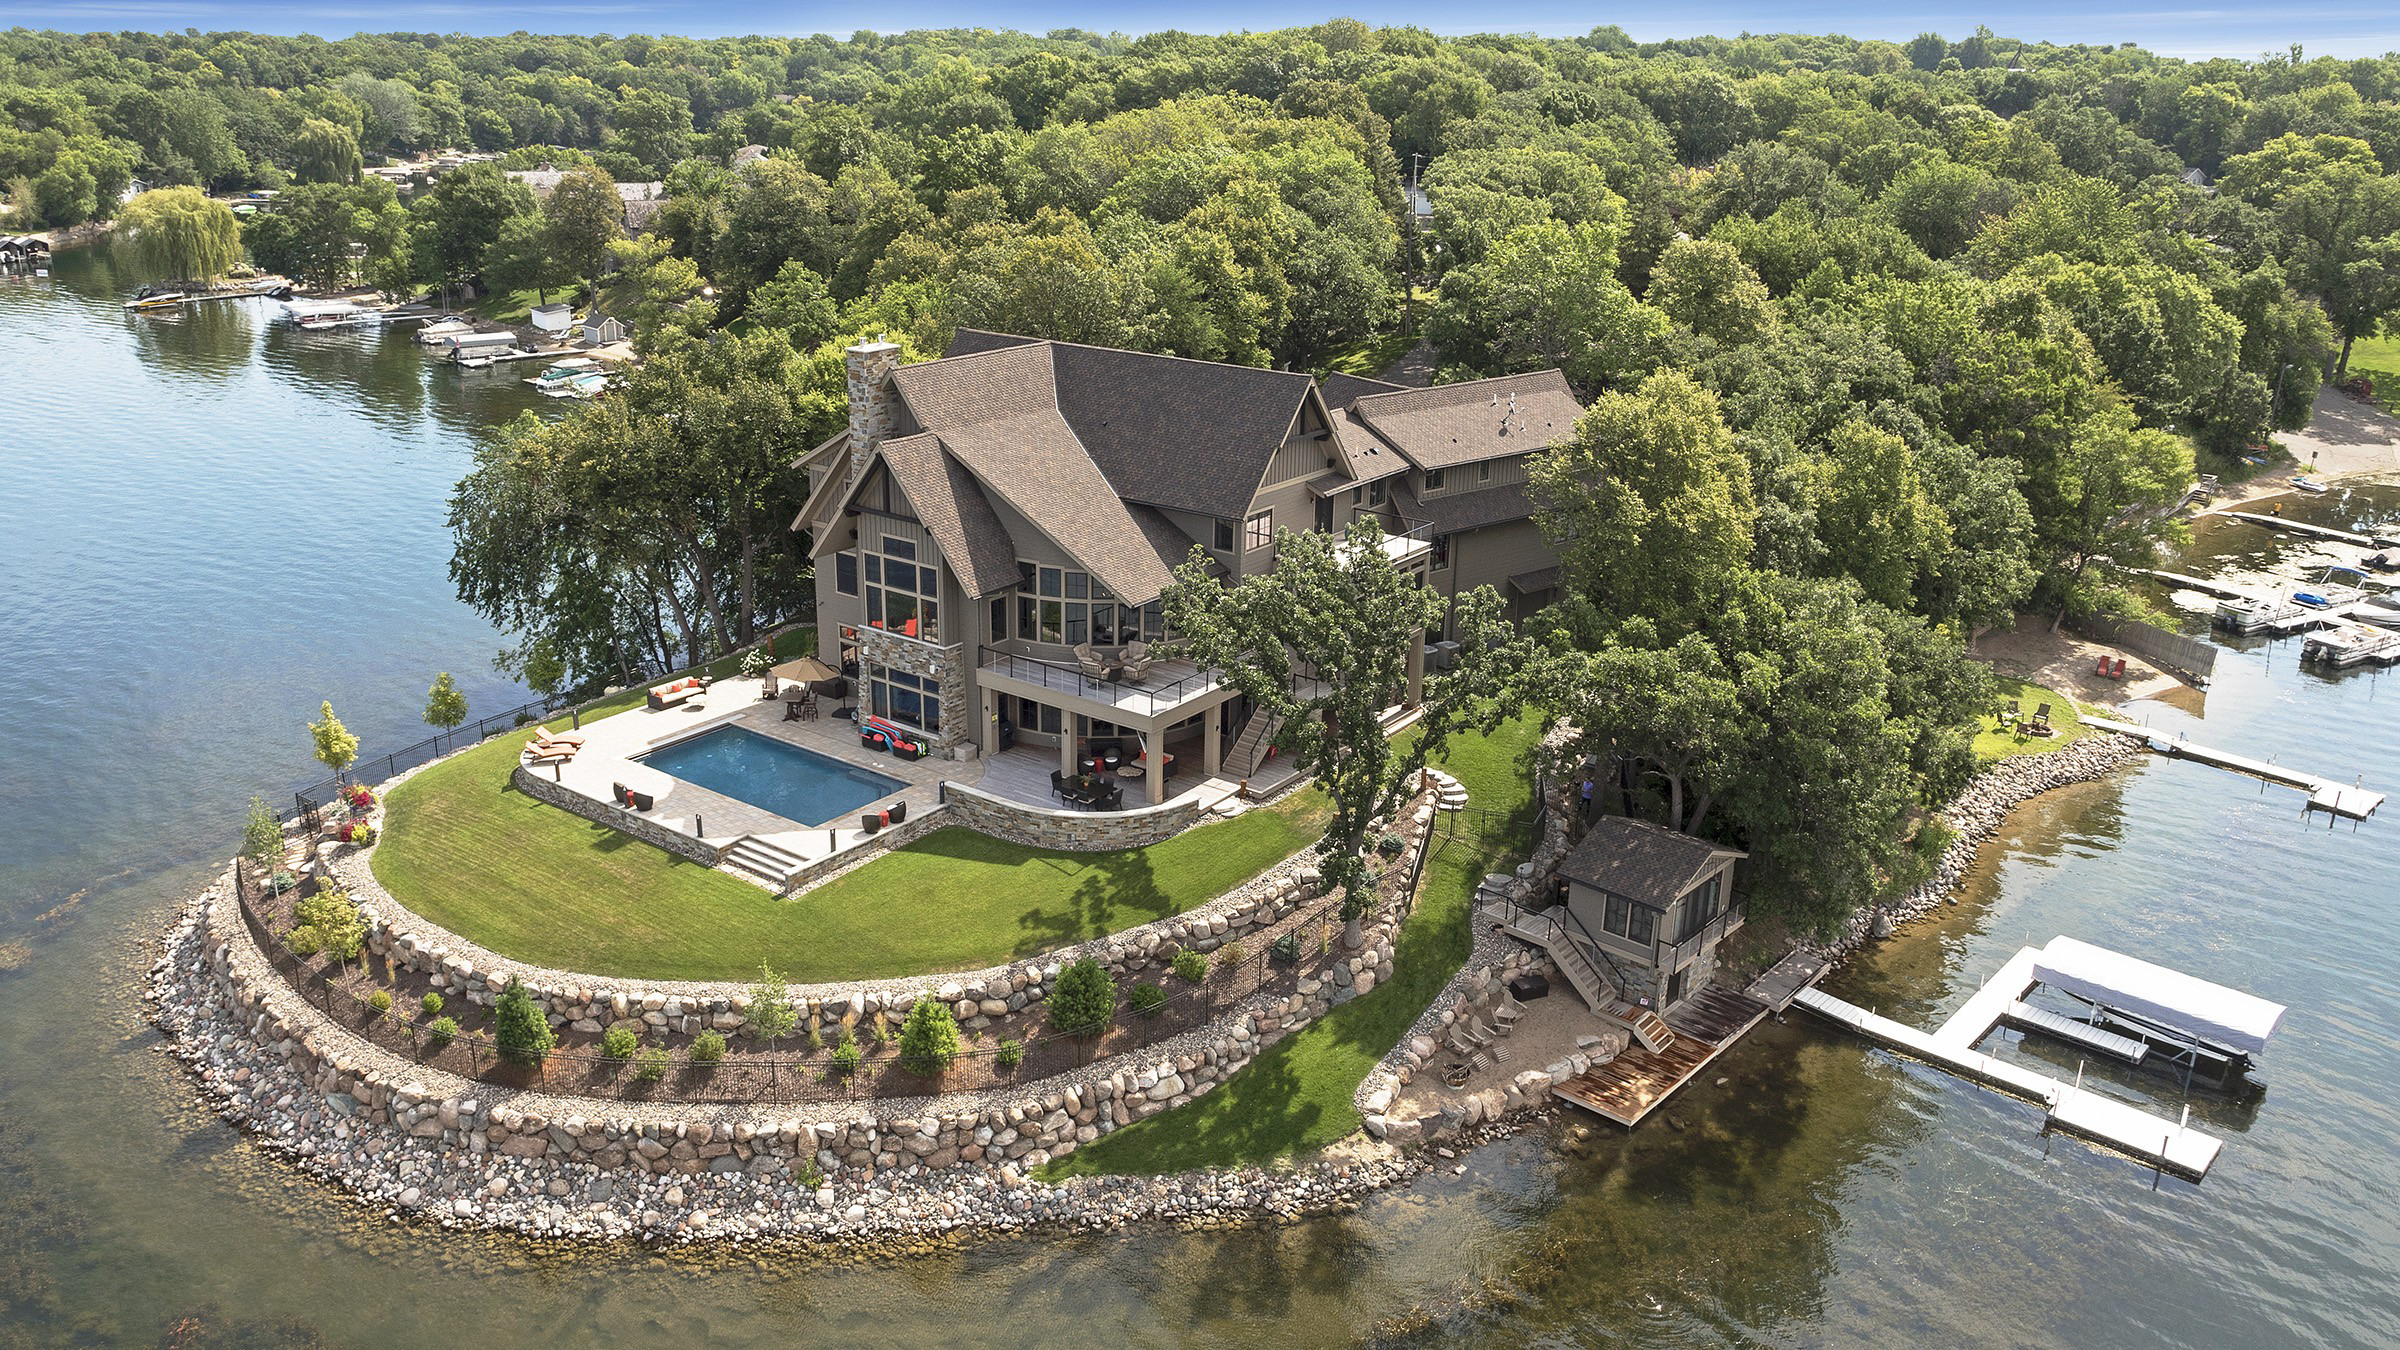 An aerial view of a contemporary home on a lake.